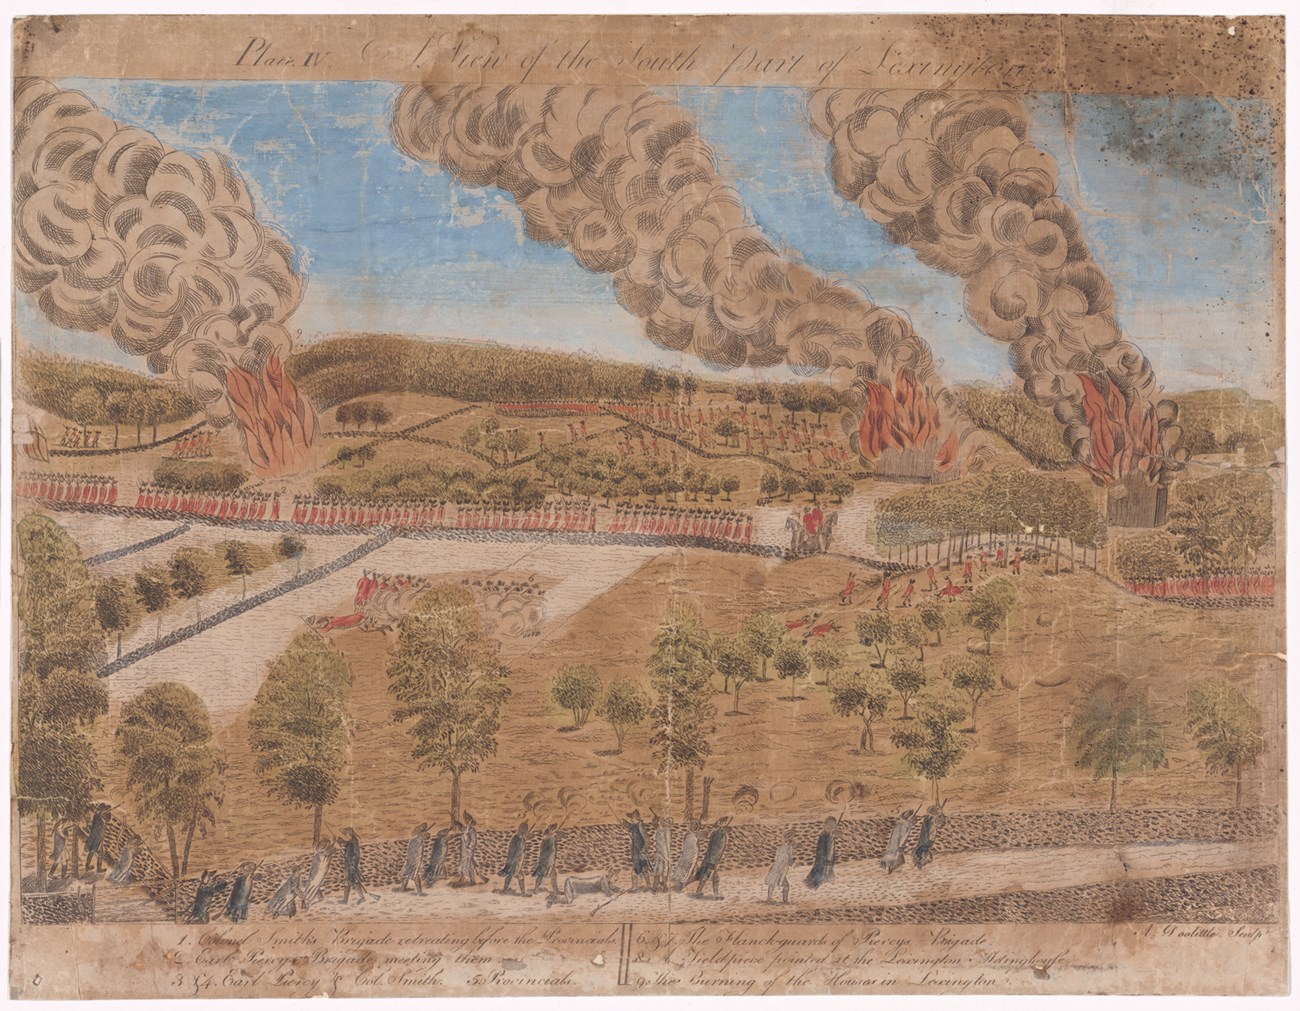 Print of British soldiers marching along a dirt road in the middle of pastures with 3 fires blazing along the road.